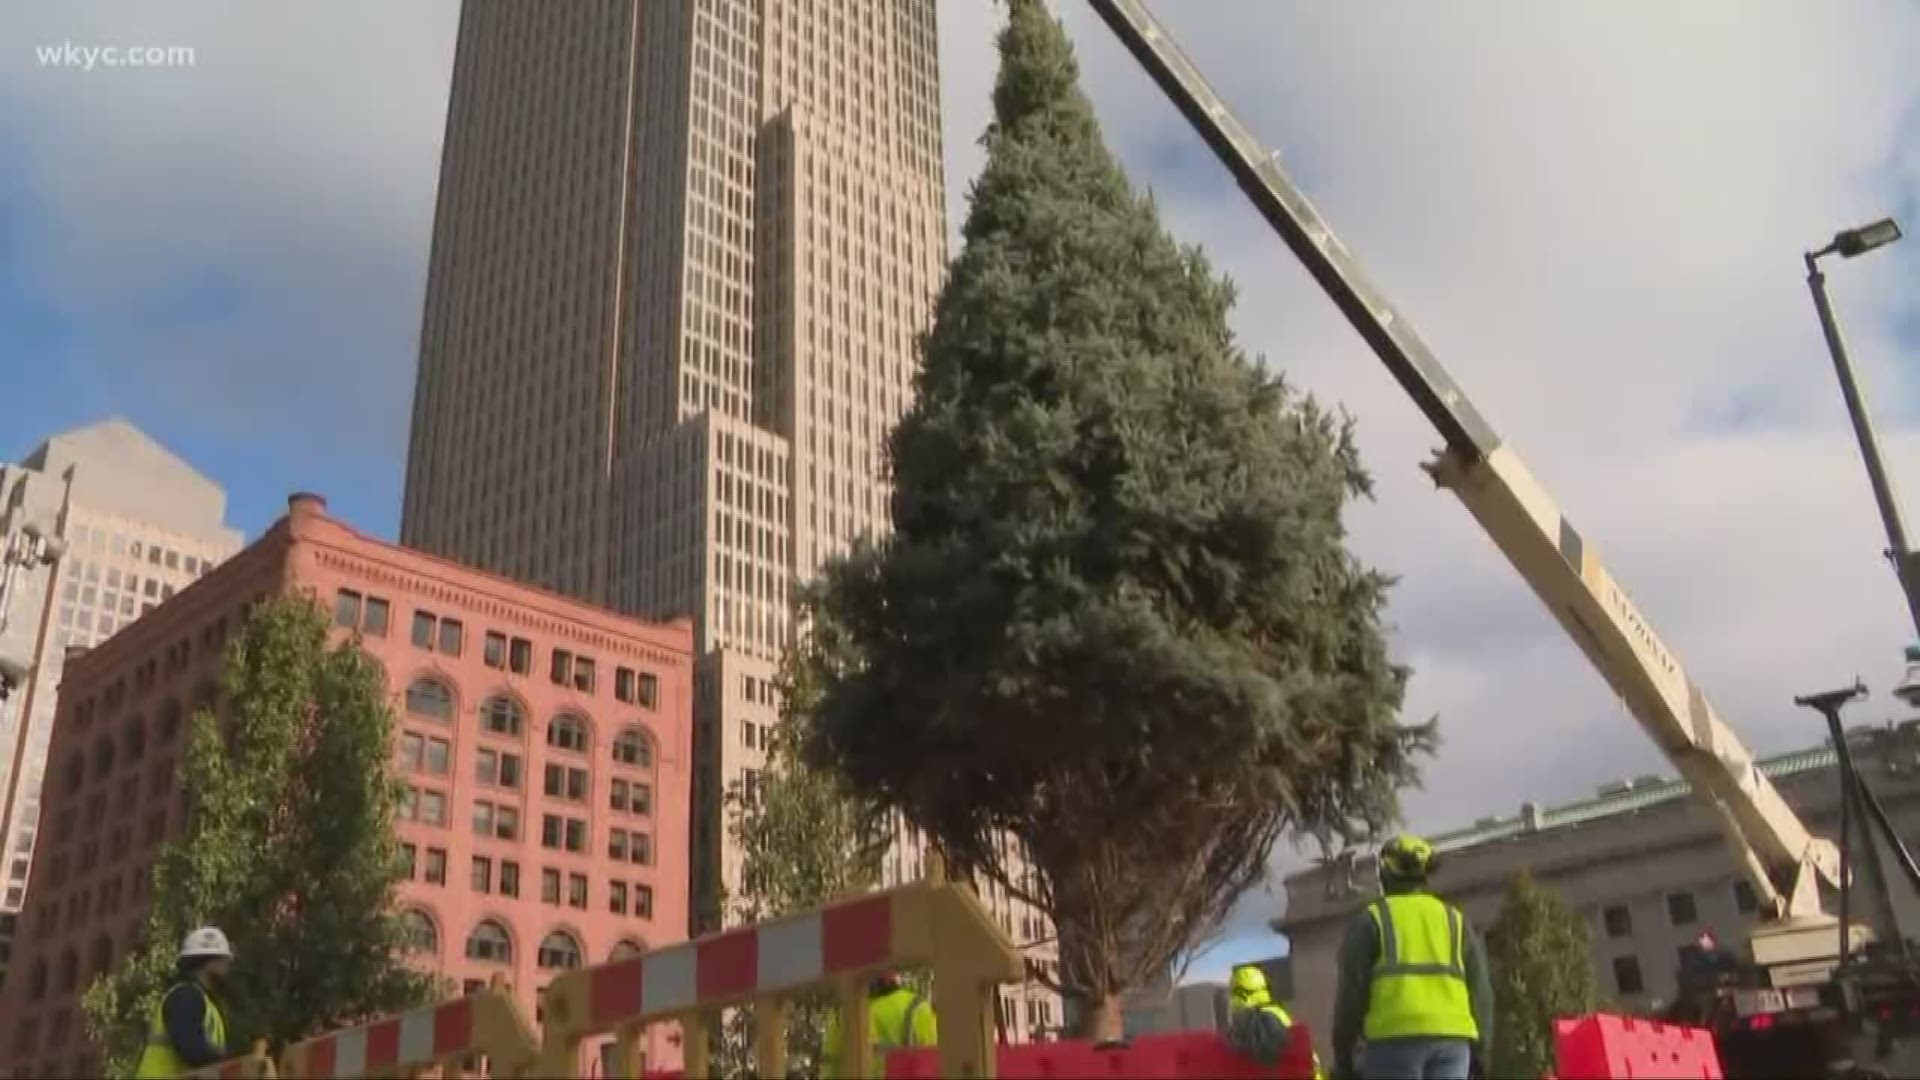 Nov. 14, 2018: It's beginning to look at lot like Christmas in downtown Cleveland. Standing at 48 feet tall, the Christmas tree was installed Wednesday morning on the north side of Public Square.